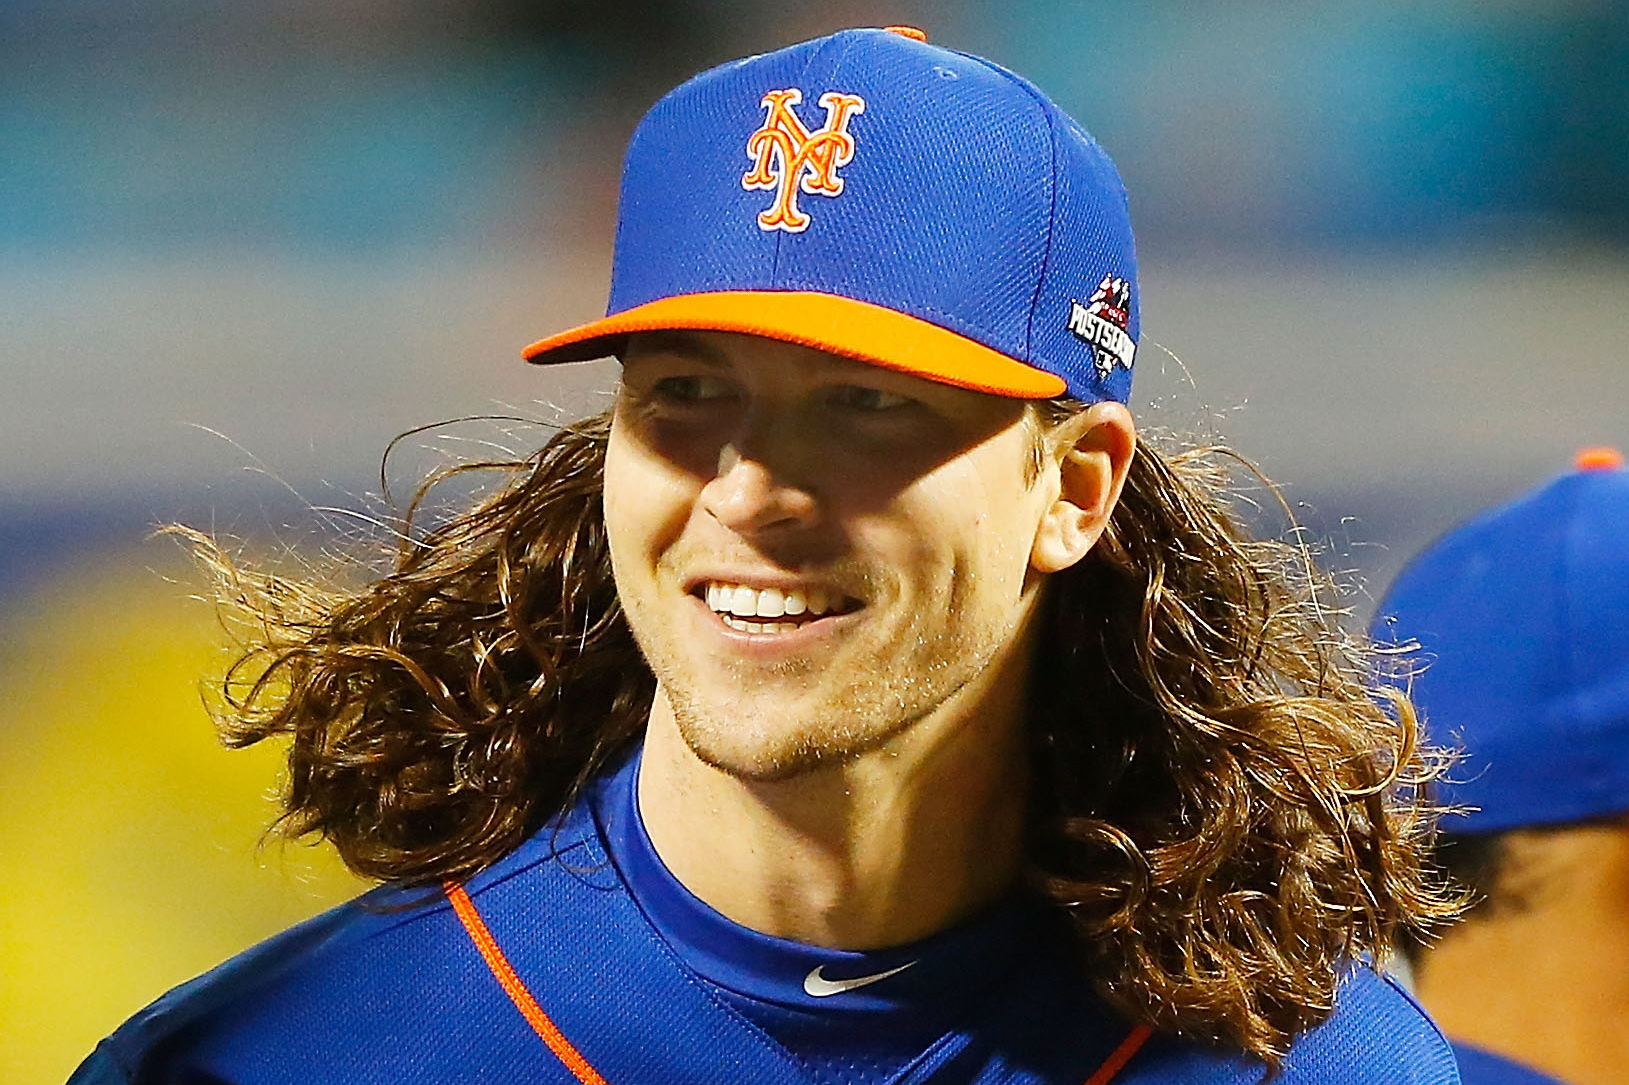 New York Mets video: Jacob deGrom features 97 m.p.h. fastball in debut